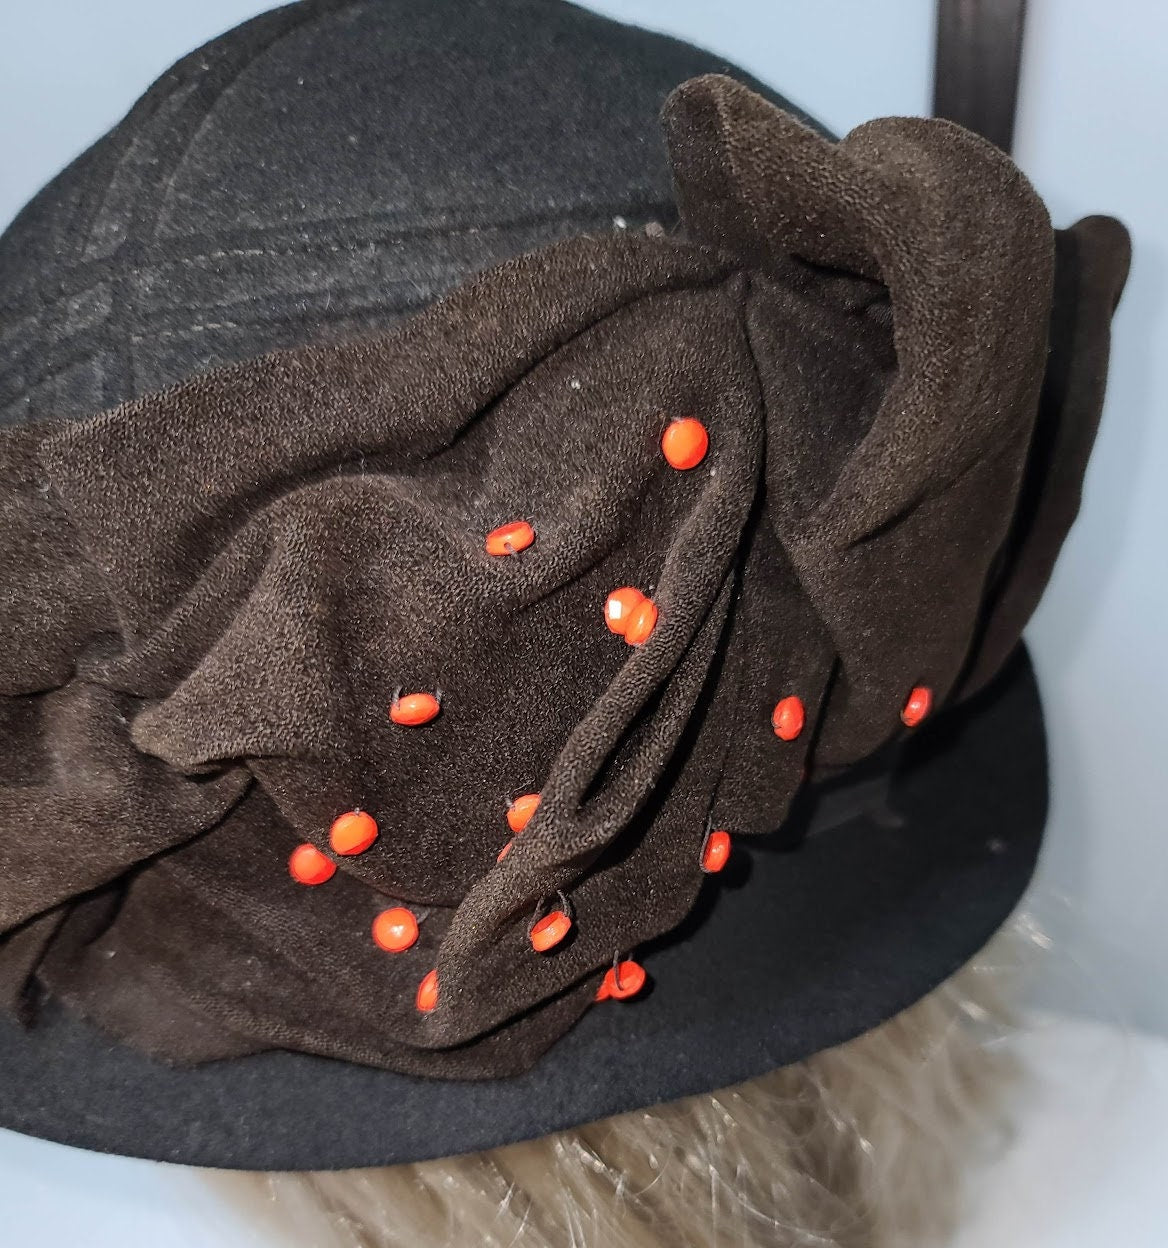 Vintage 1930s Hat Black Wool Cloche Hat Brown Ruched Fabric Ornament Orange Metal Dots Flapper Art Deco 21 in.